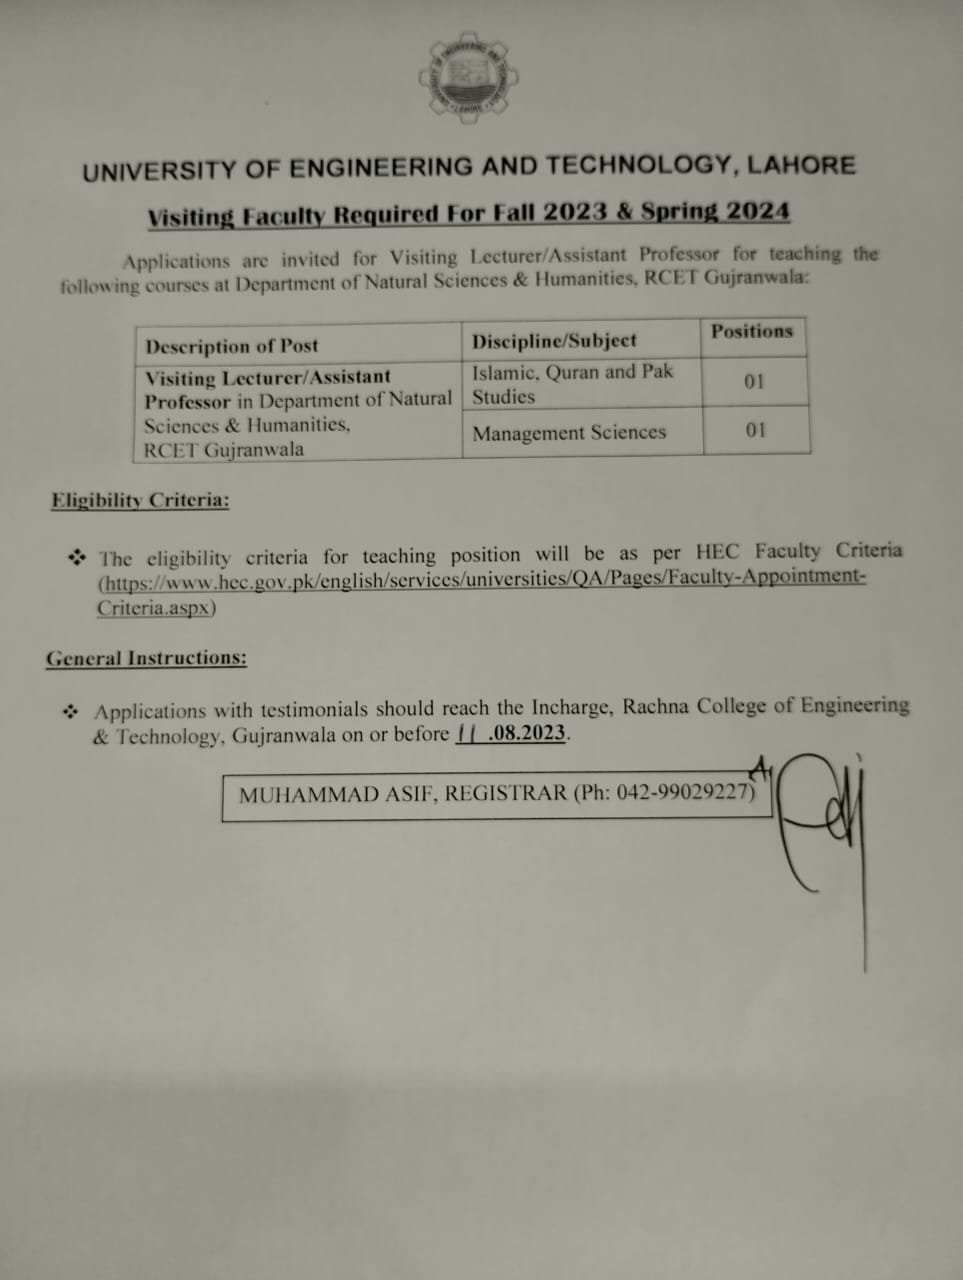 Visiting_Faculty_Required_for_Fall_2023_and_2024